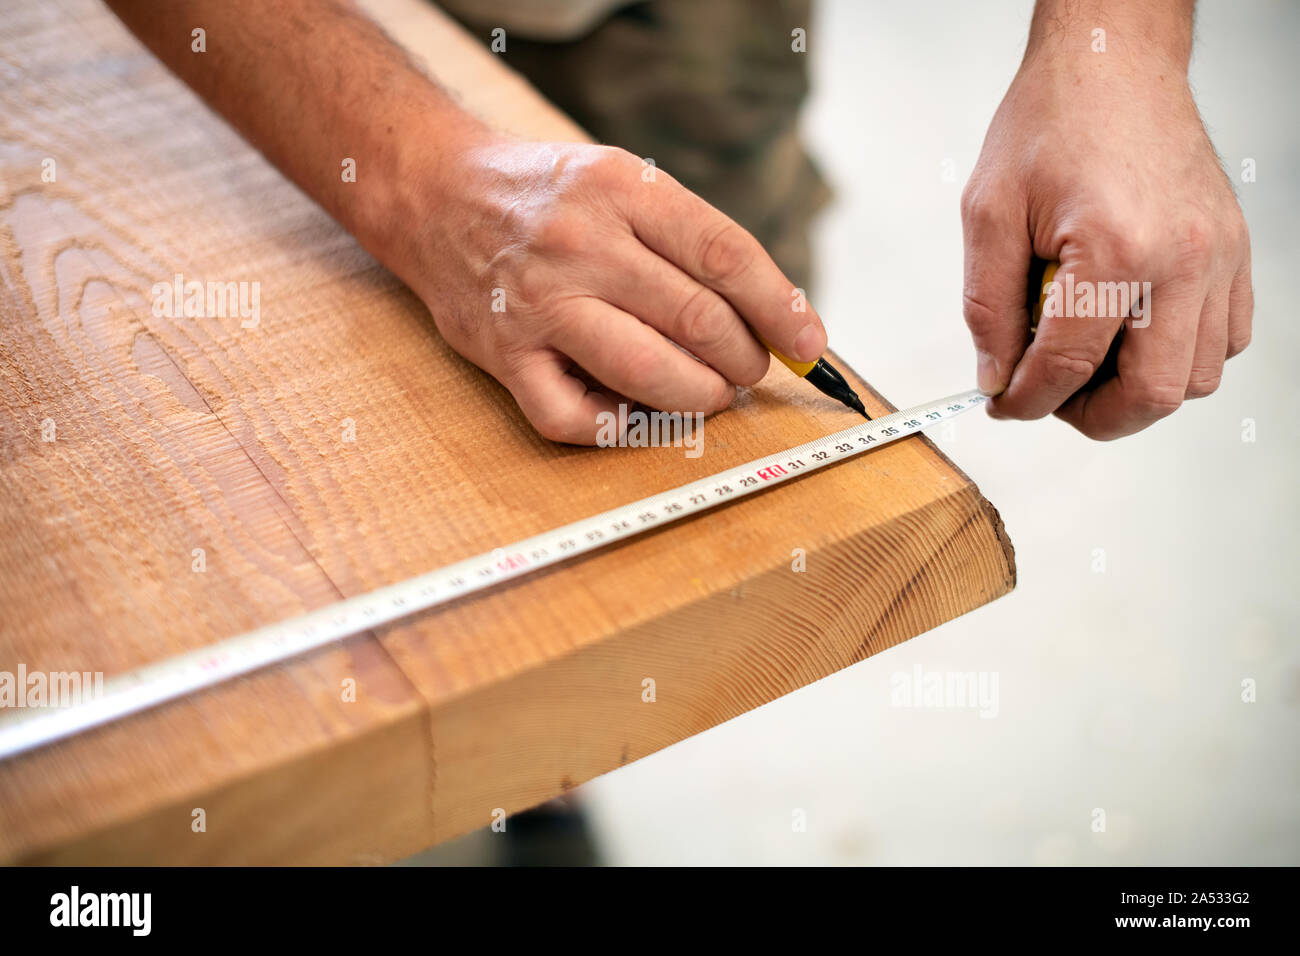 Carpenter measuring a wooden plank with a tape measure and marker in a woodworking workshop in a close up on his hands Stock Photo